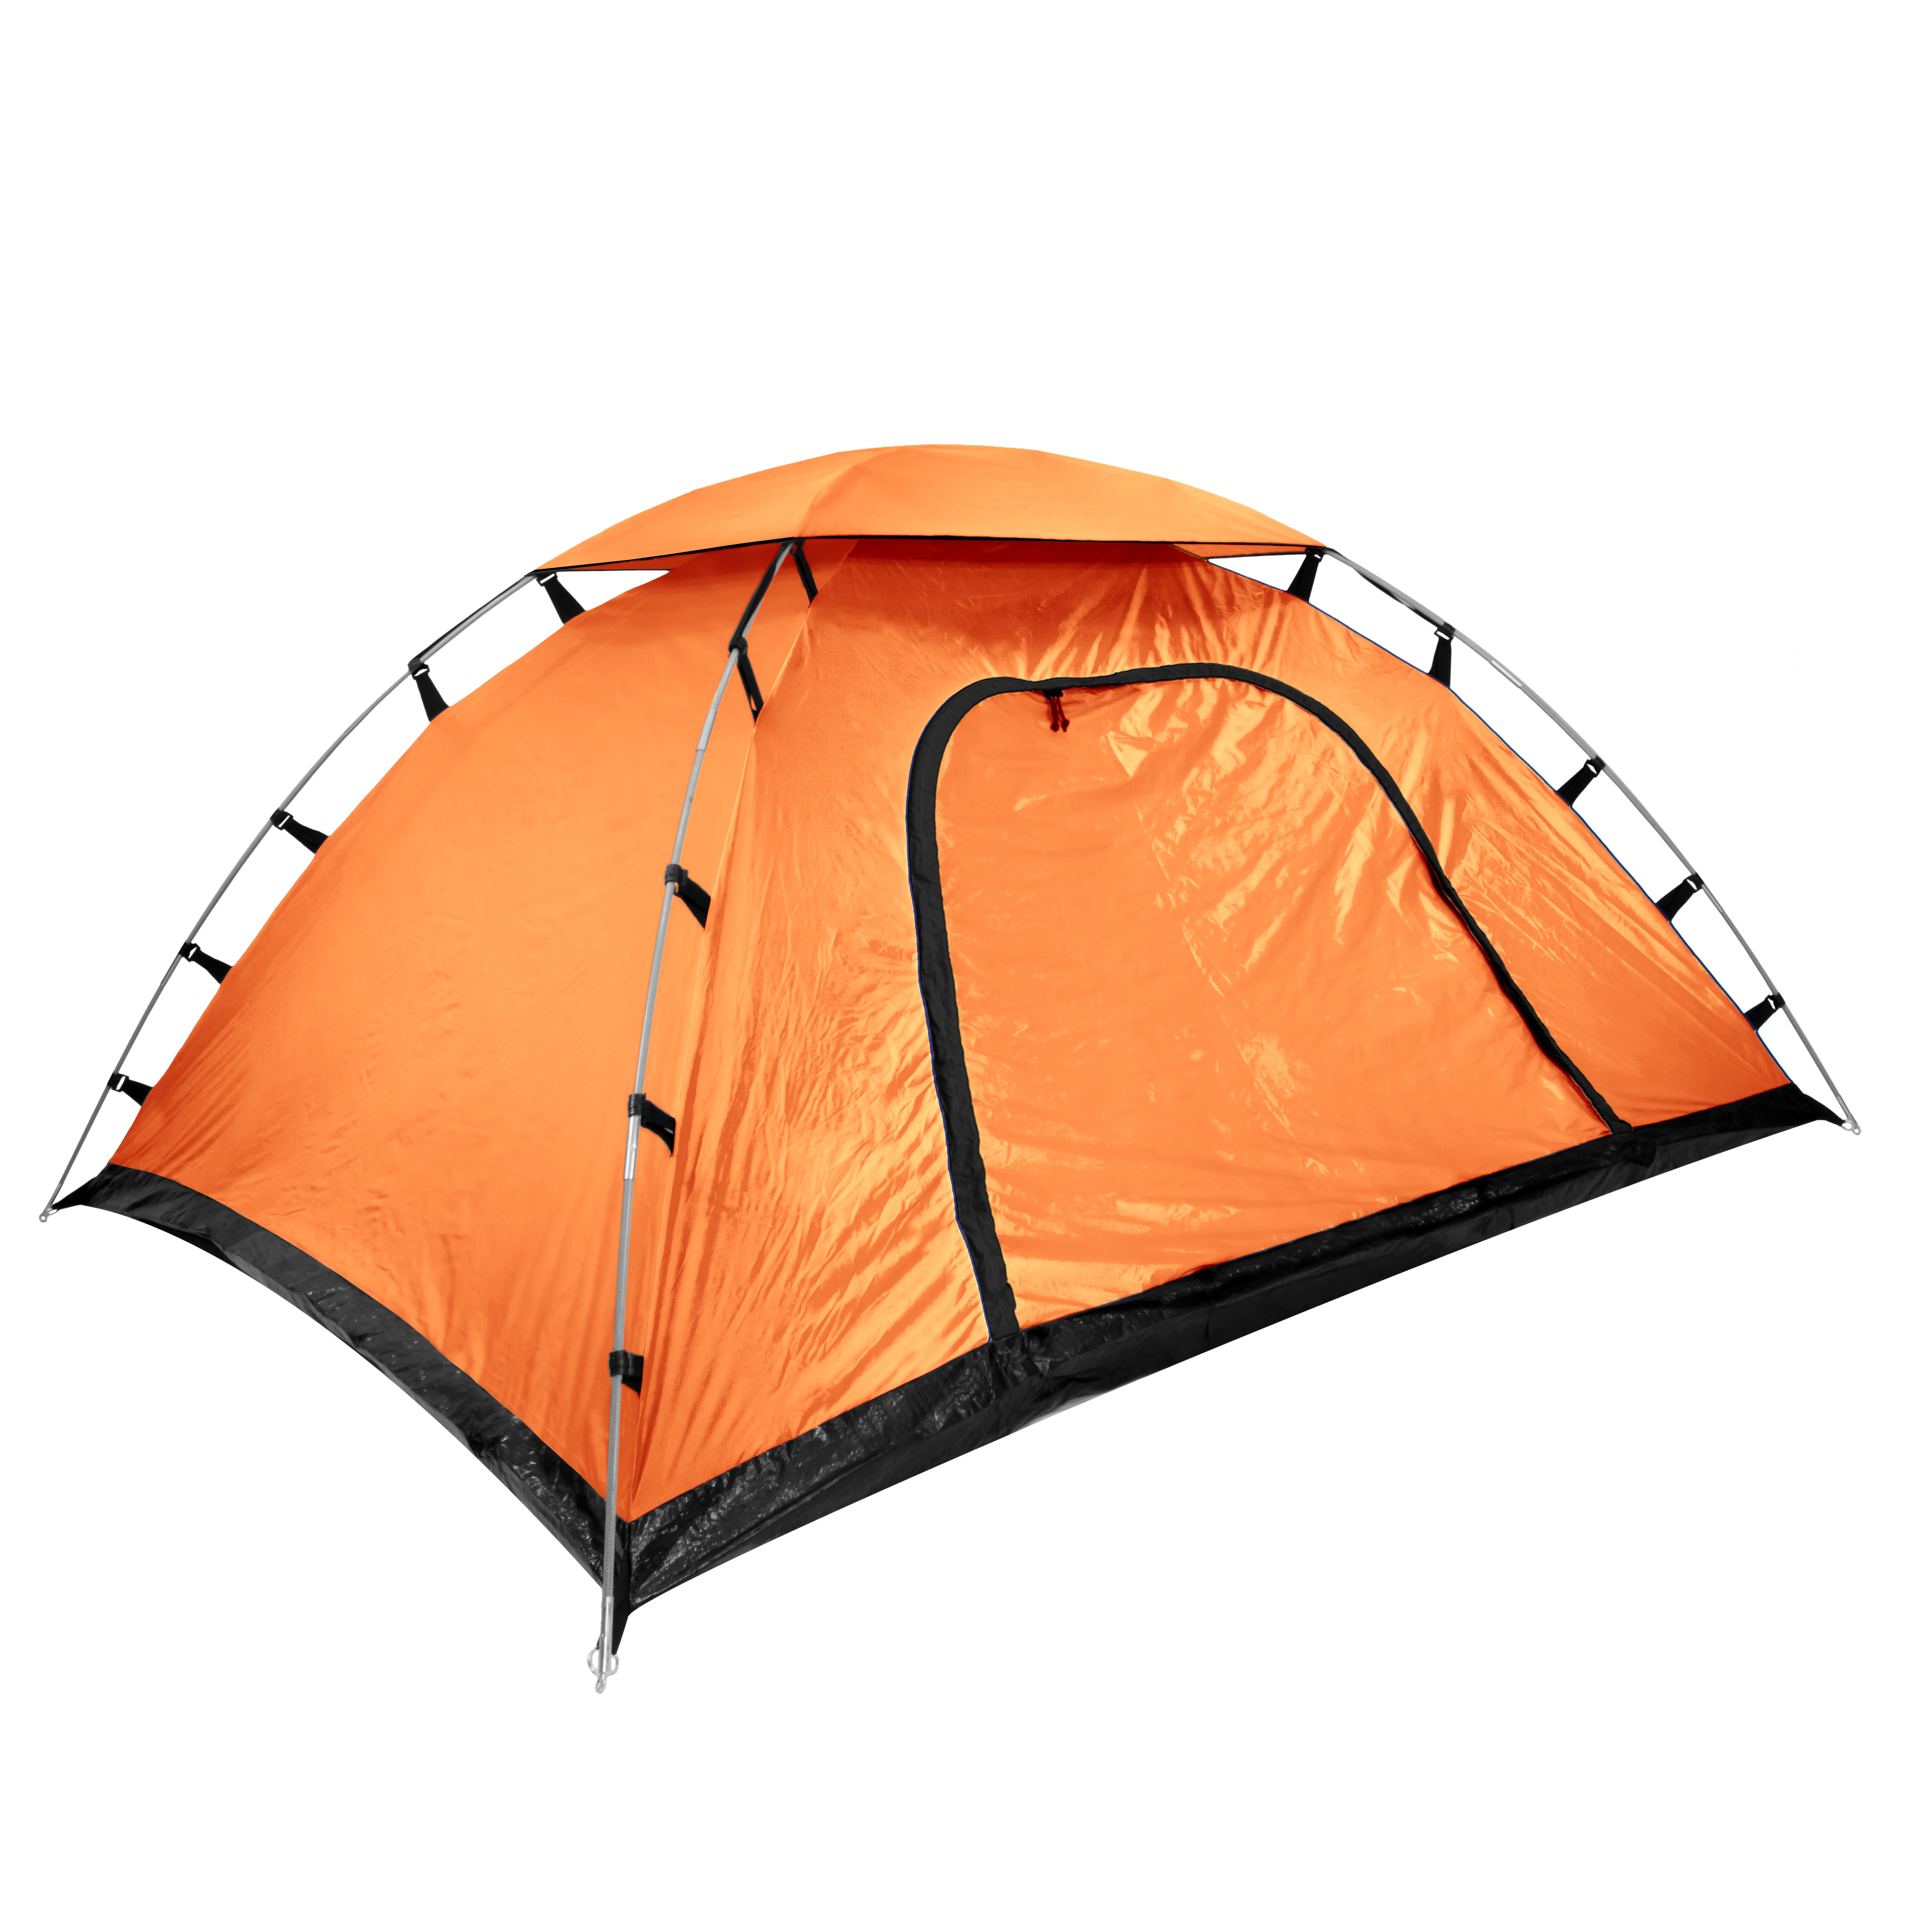 Camping Tent, Backpacking Tent